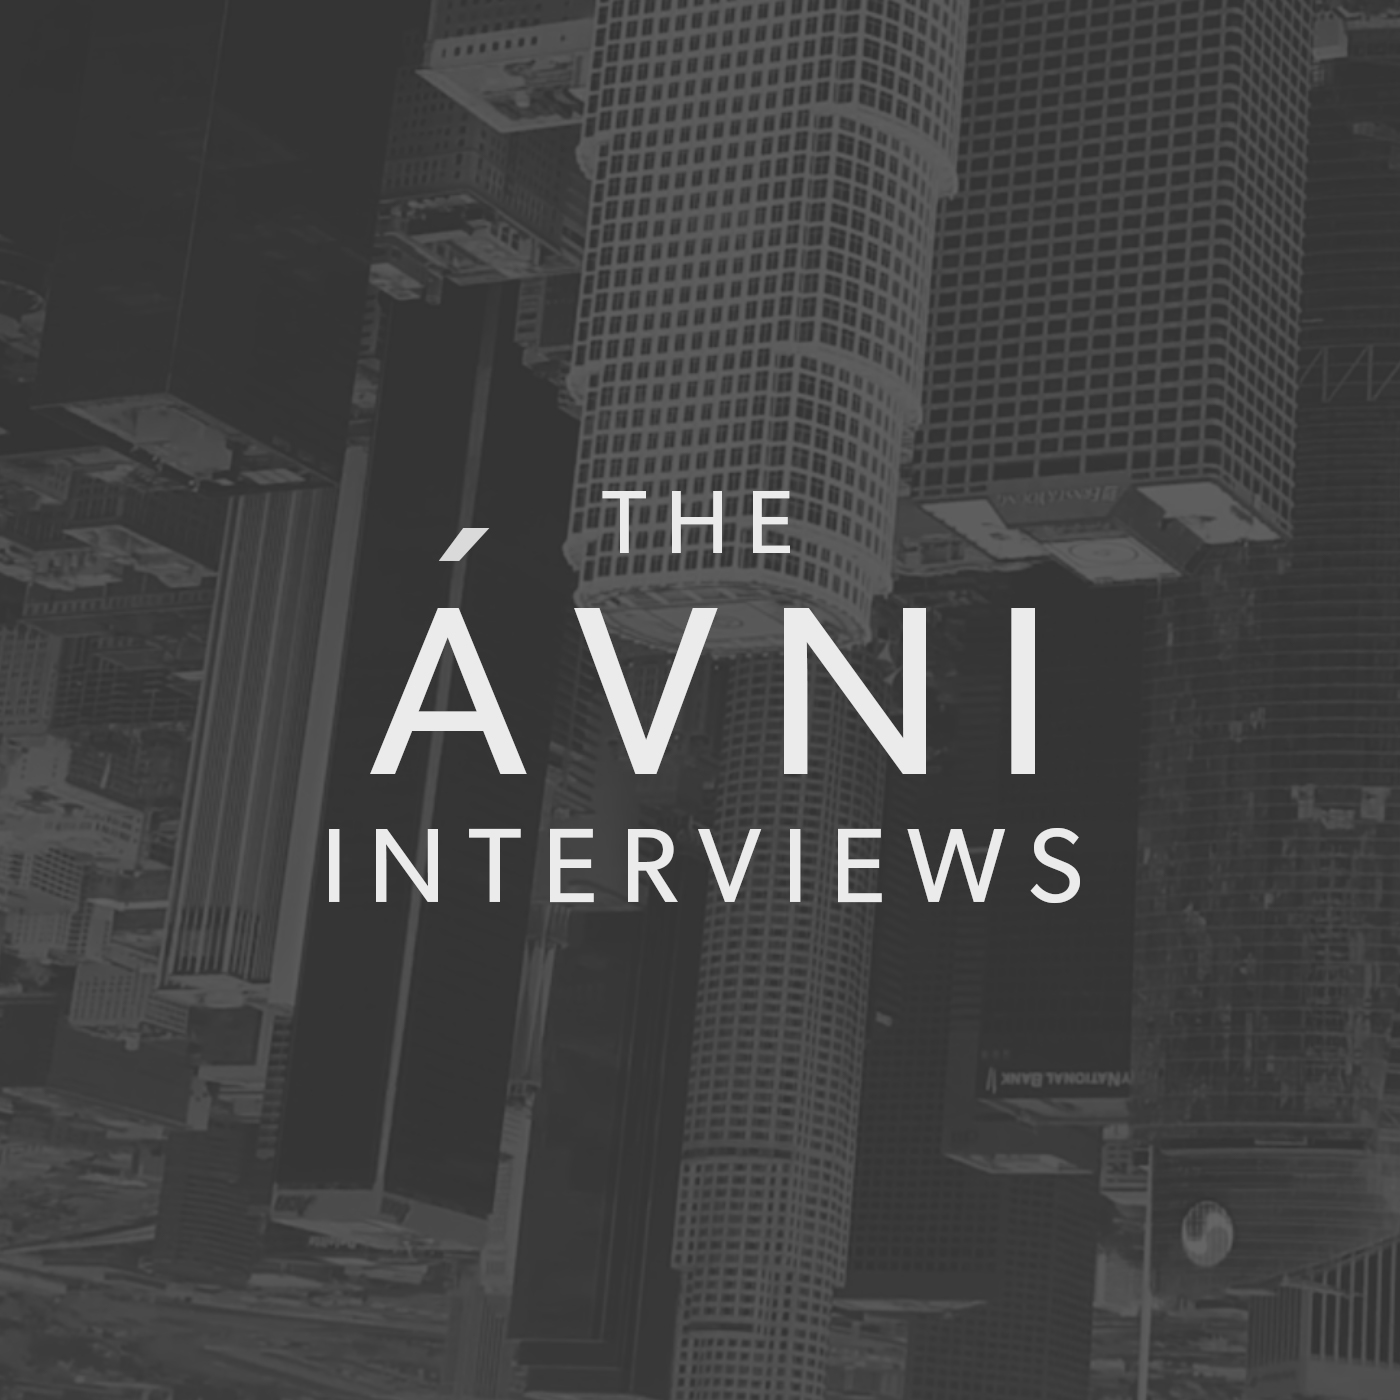 Get What You Want Mental Process | AVNI 0027 with Mikey Taylor & Eric Bork